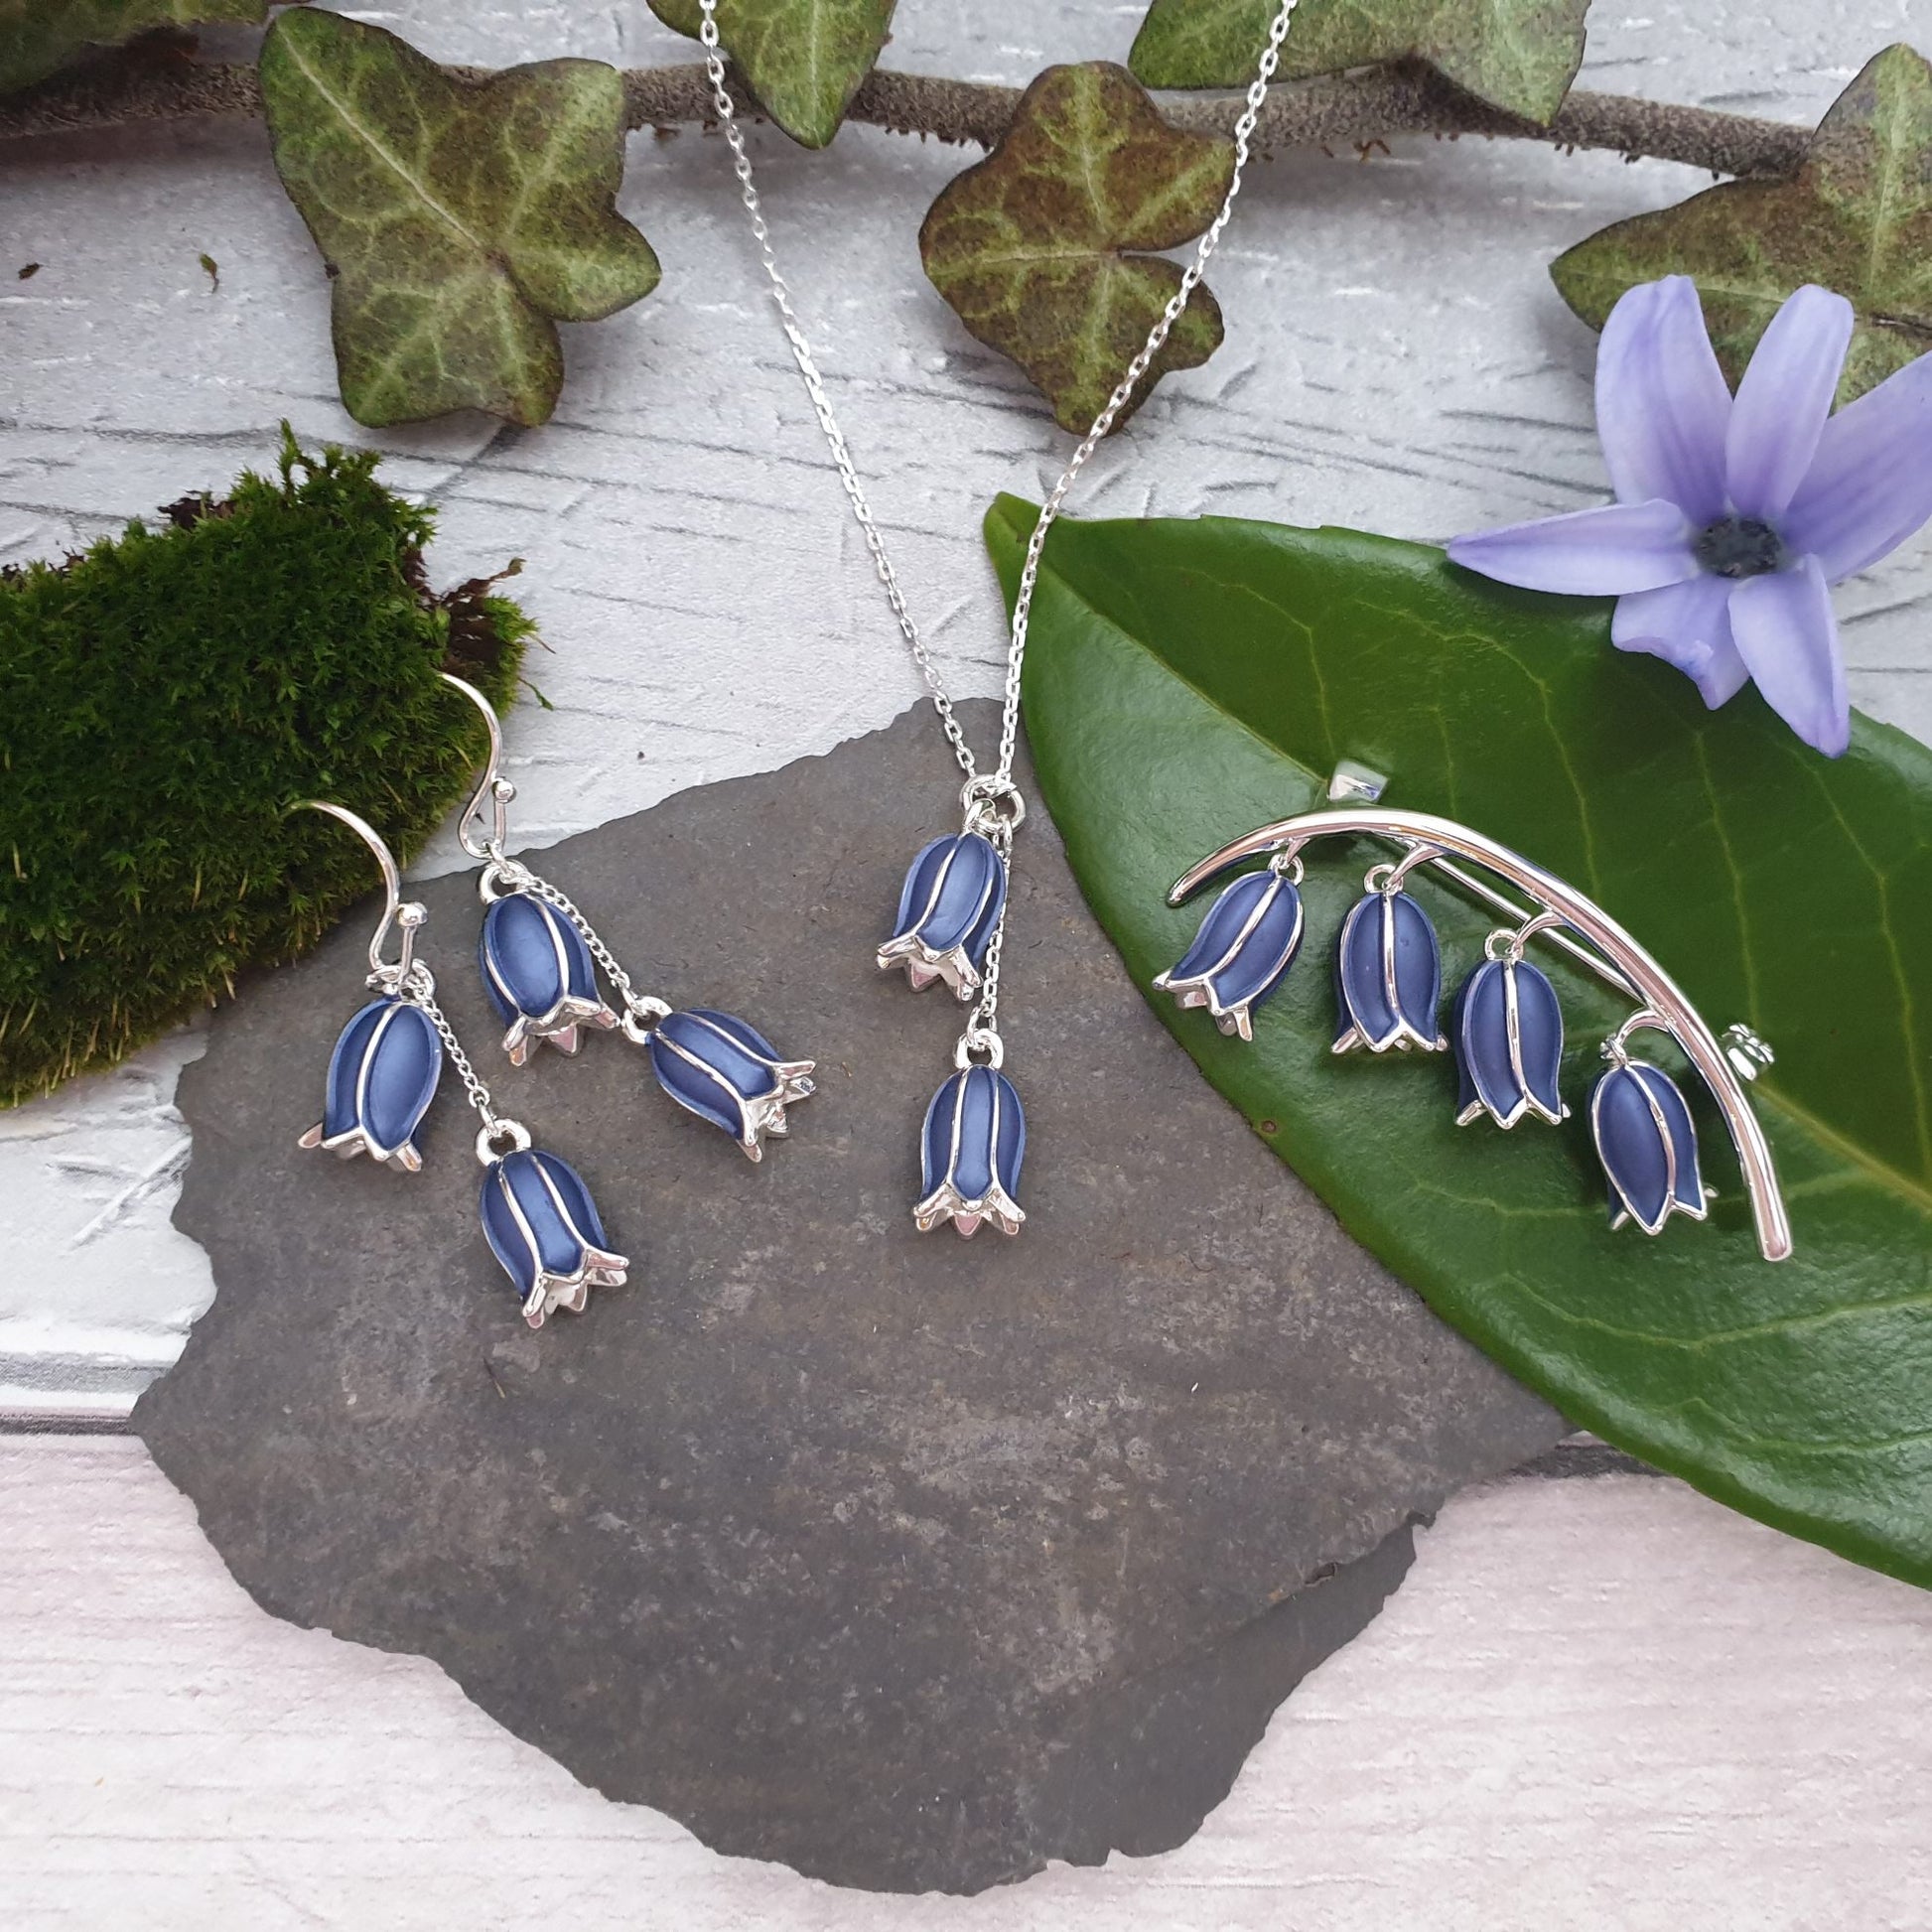 3 piece set of Bluebell jewellery, necklace, earrings and brooch